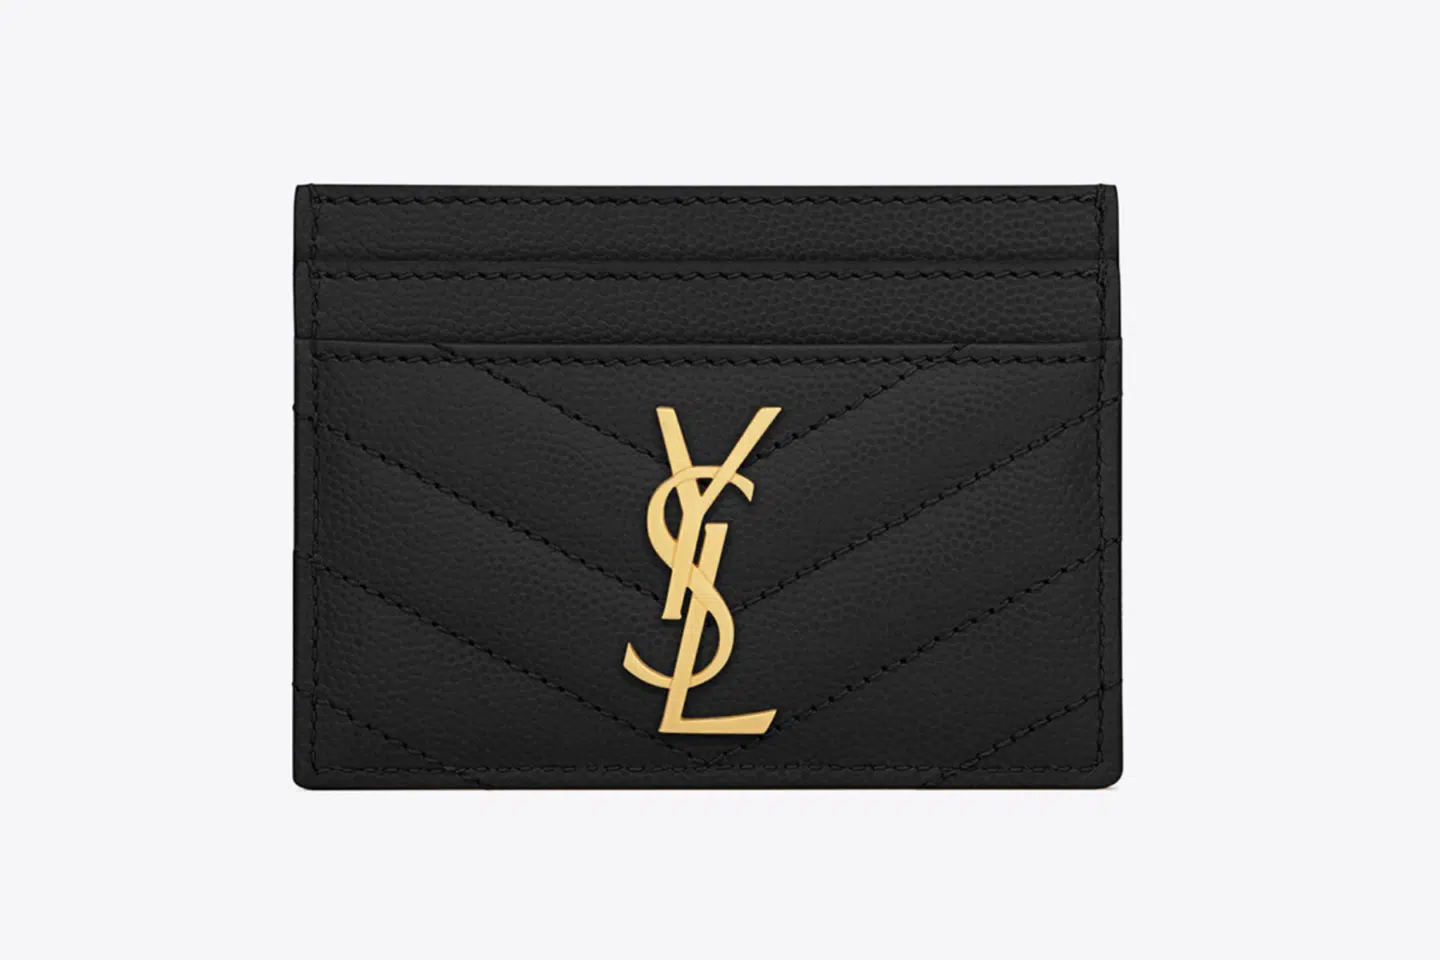 Gorgeous YSL card holder picks, by fashion blogger What The Fab